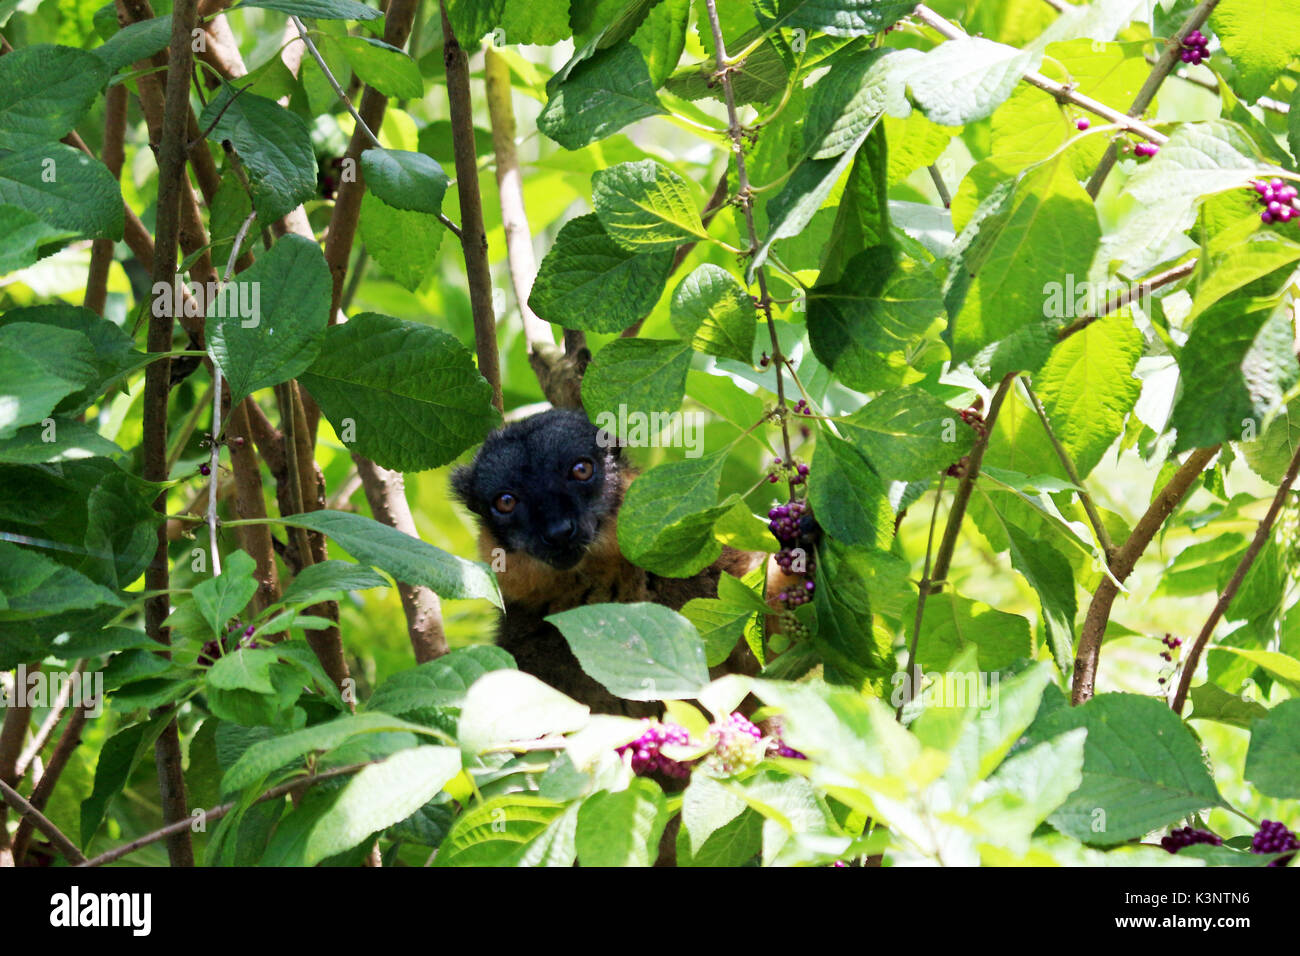 A Camouflaged Brown Lemur Peering Out From Behind the Bushes. Stock Photo